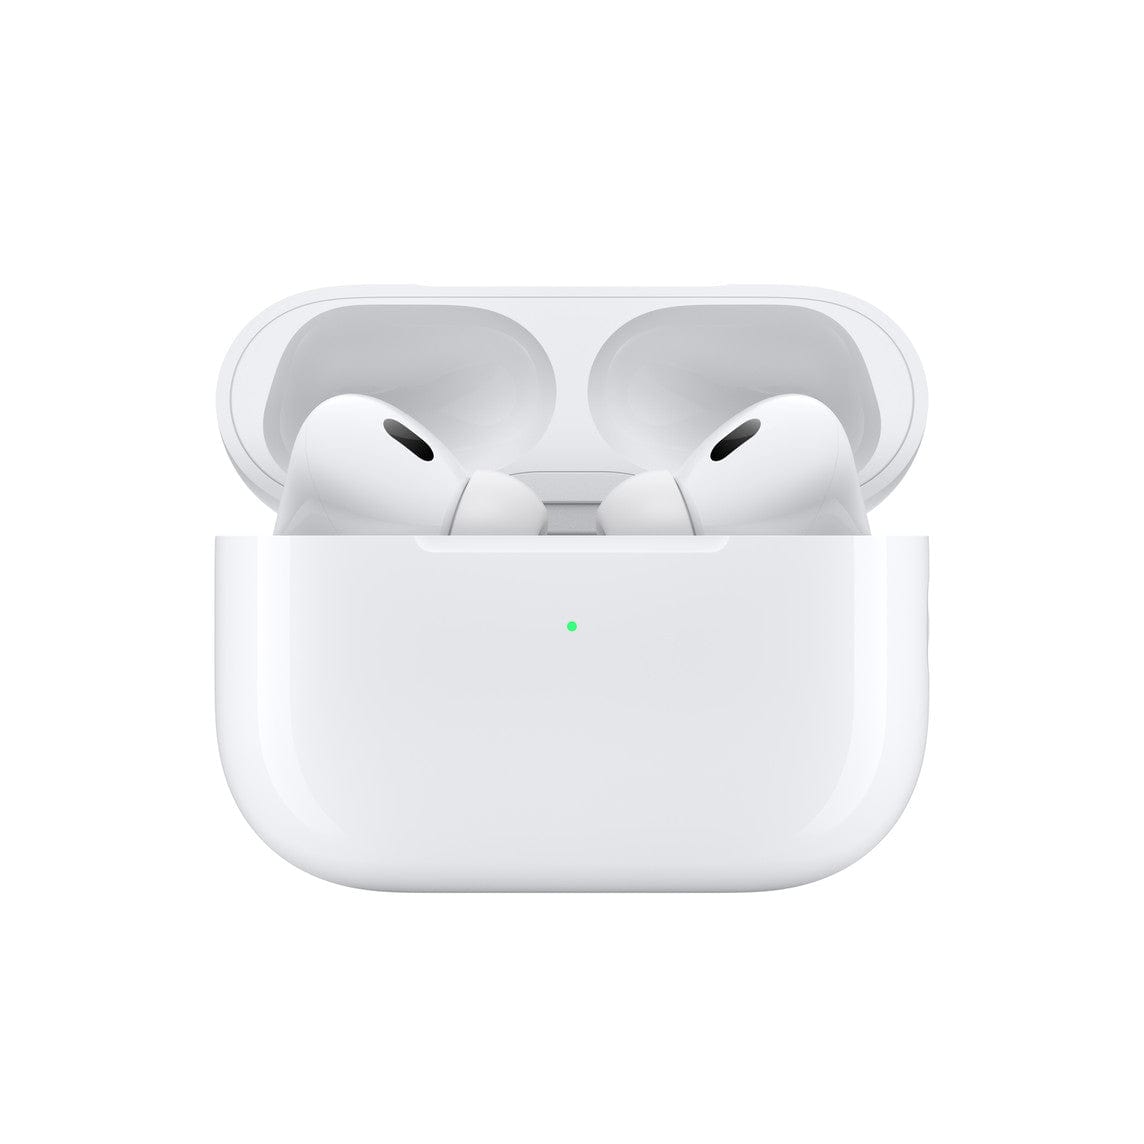 Apple Airpods AirPods Pro (2nd gen) with MagSafe Charging Case